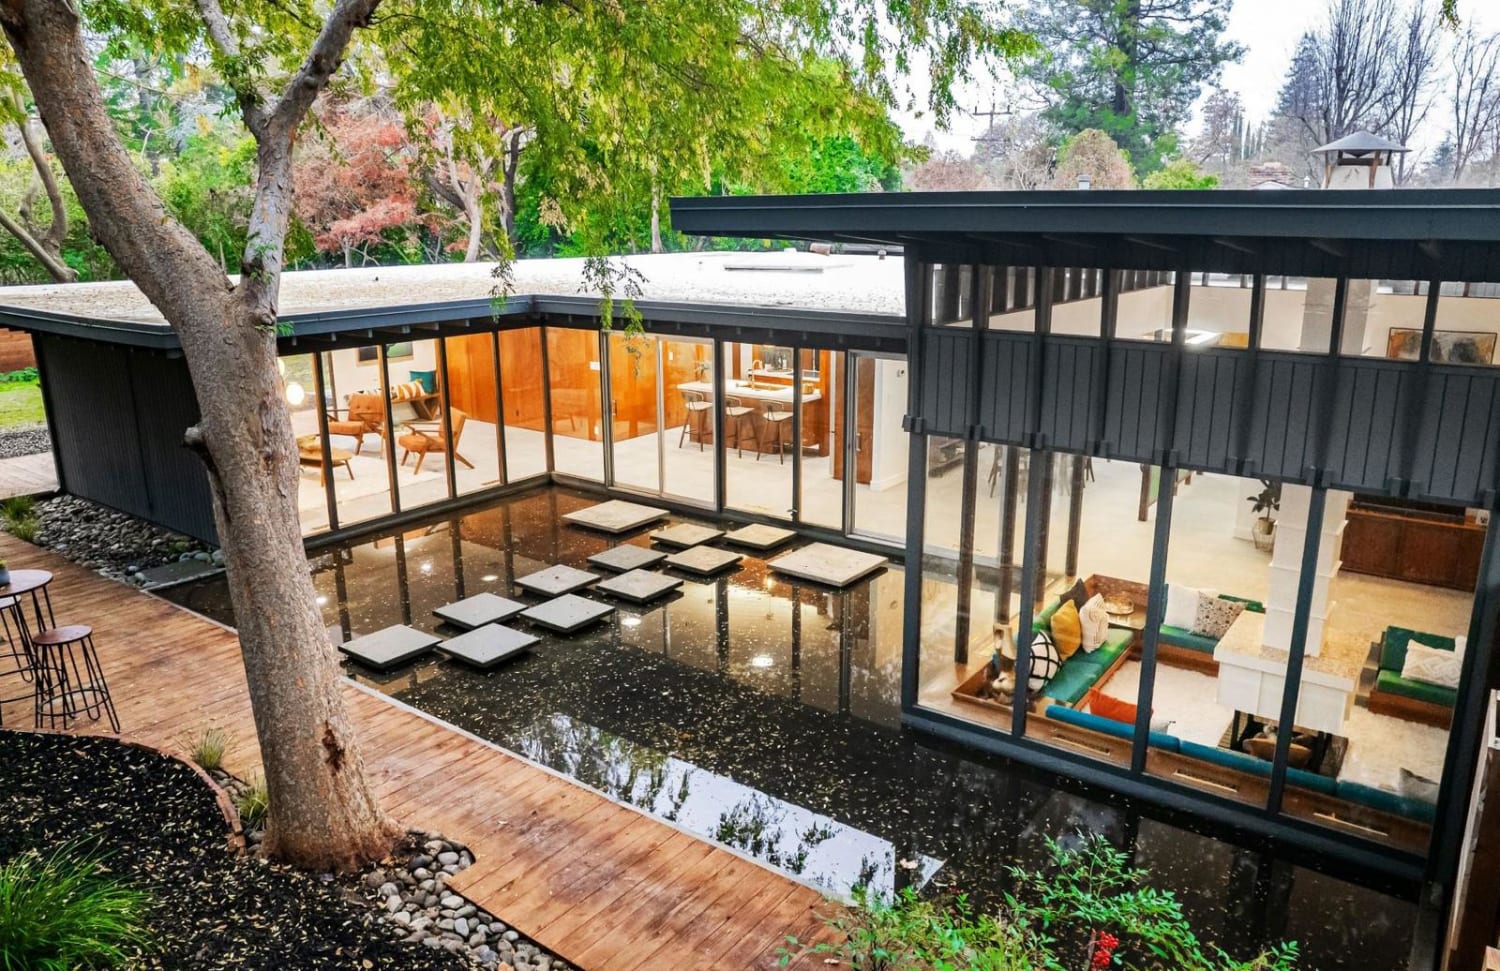 Renovated mid-century house with orginal reflecting pools, designed by John Henry Carter, 1968, Sacramento, CA